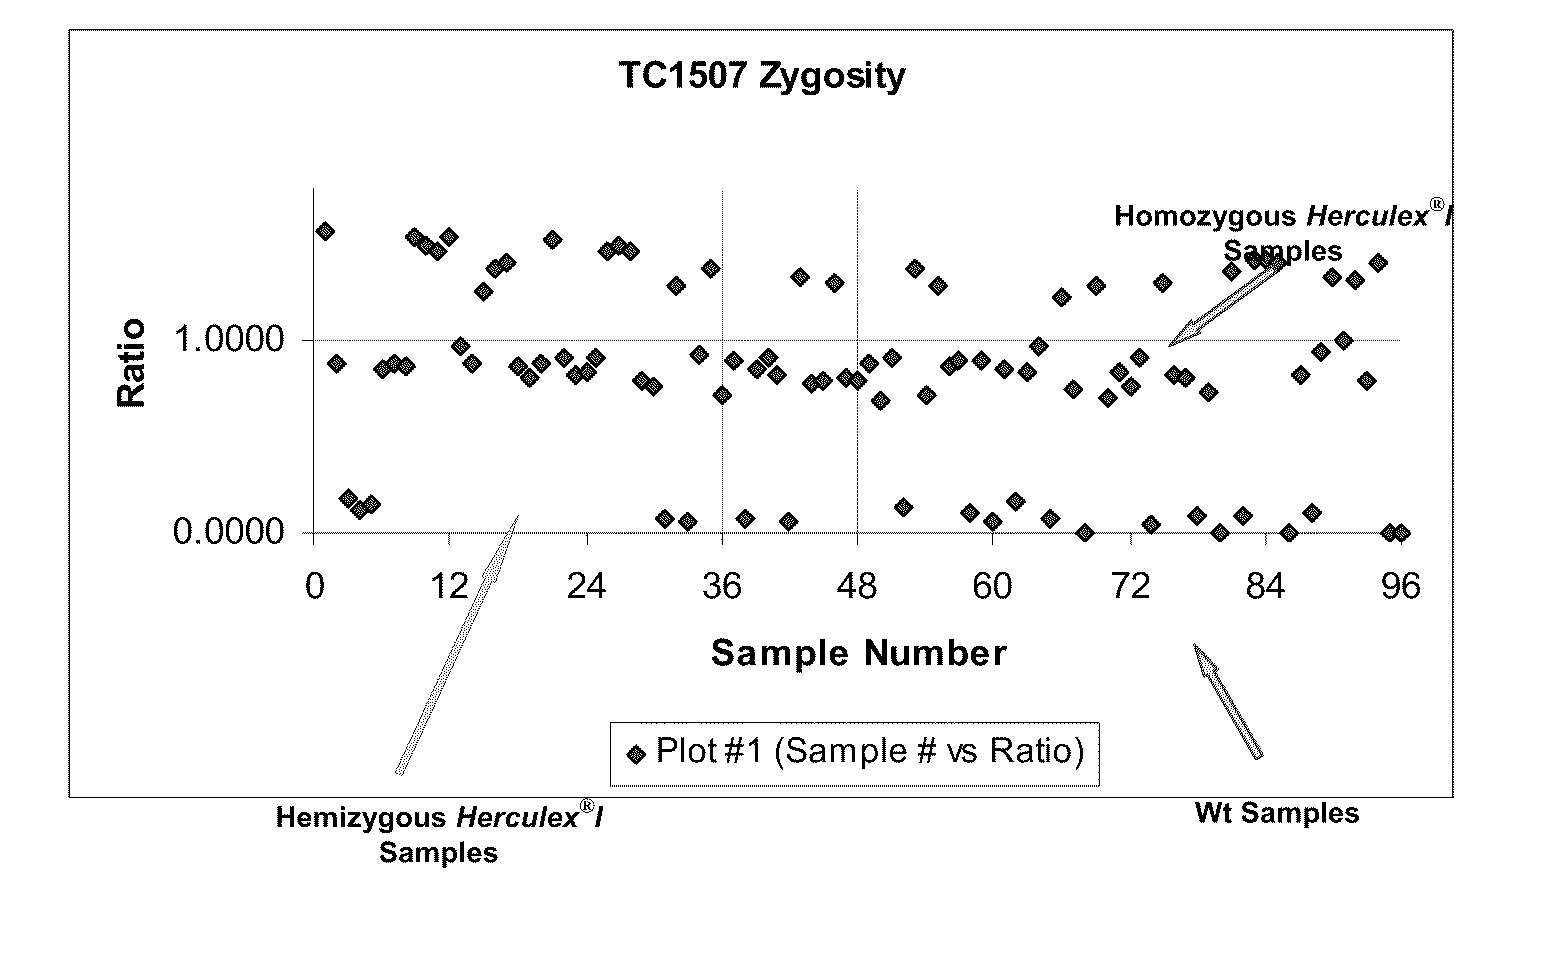 Endpoint taqman methods for determining zygosity of corn comprising tc1507 events